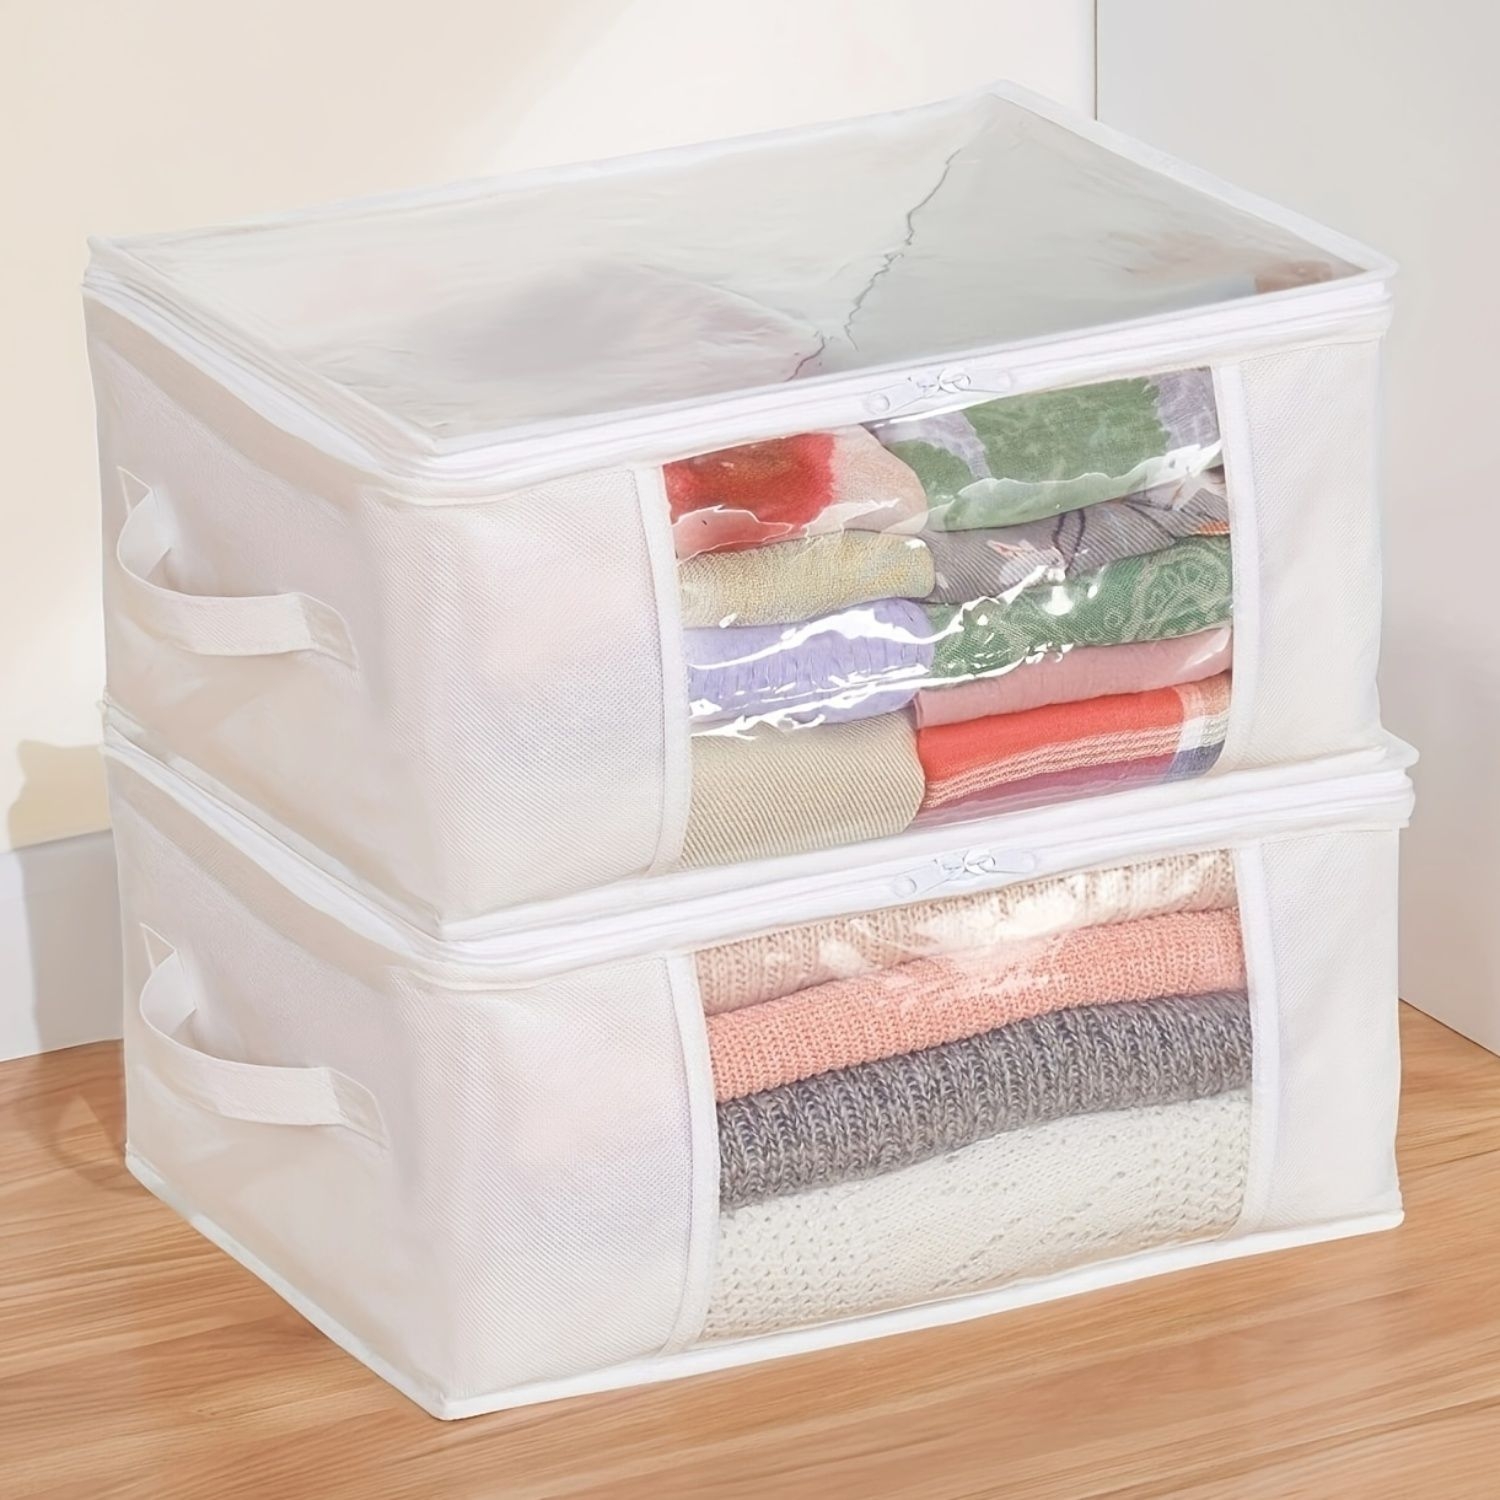 Small Bedroom Storage Ideas - Foter